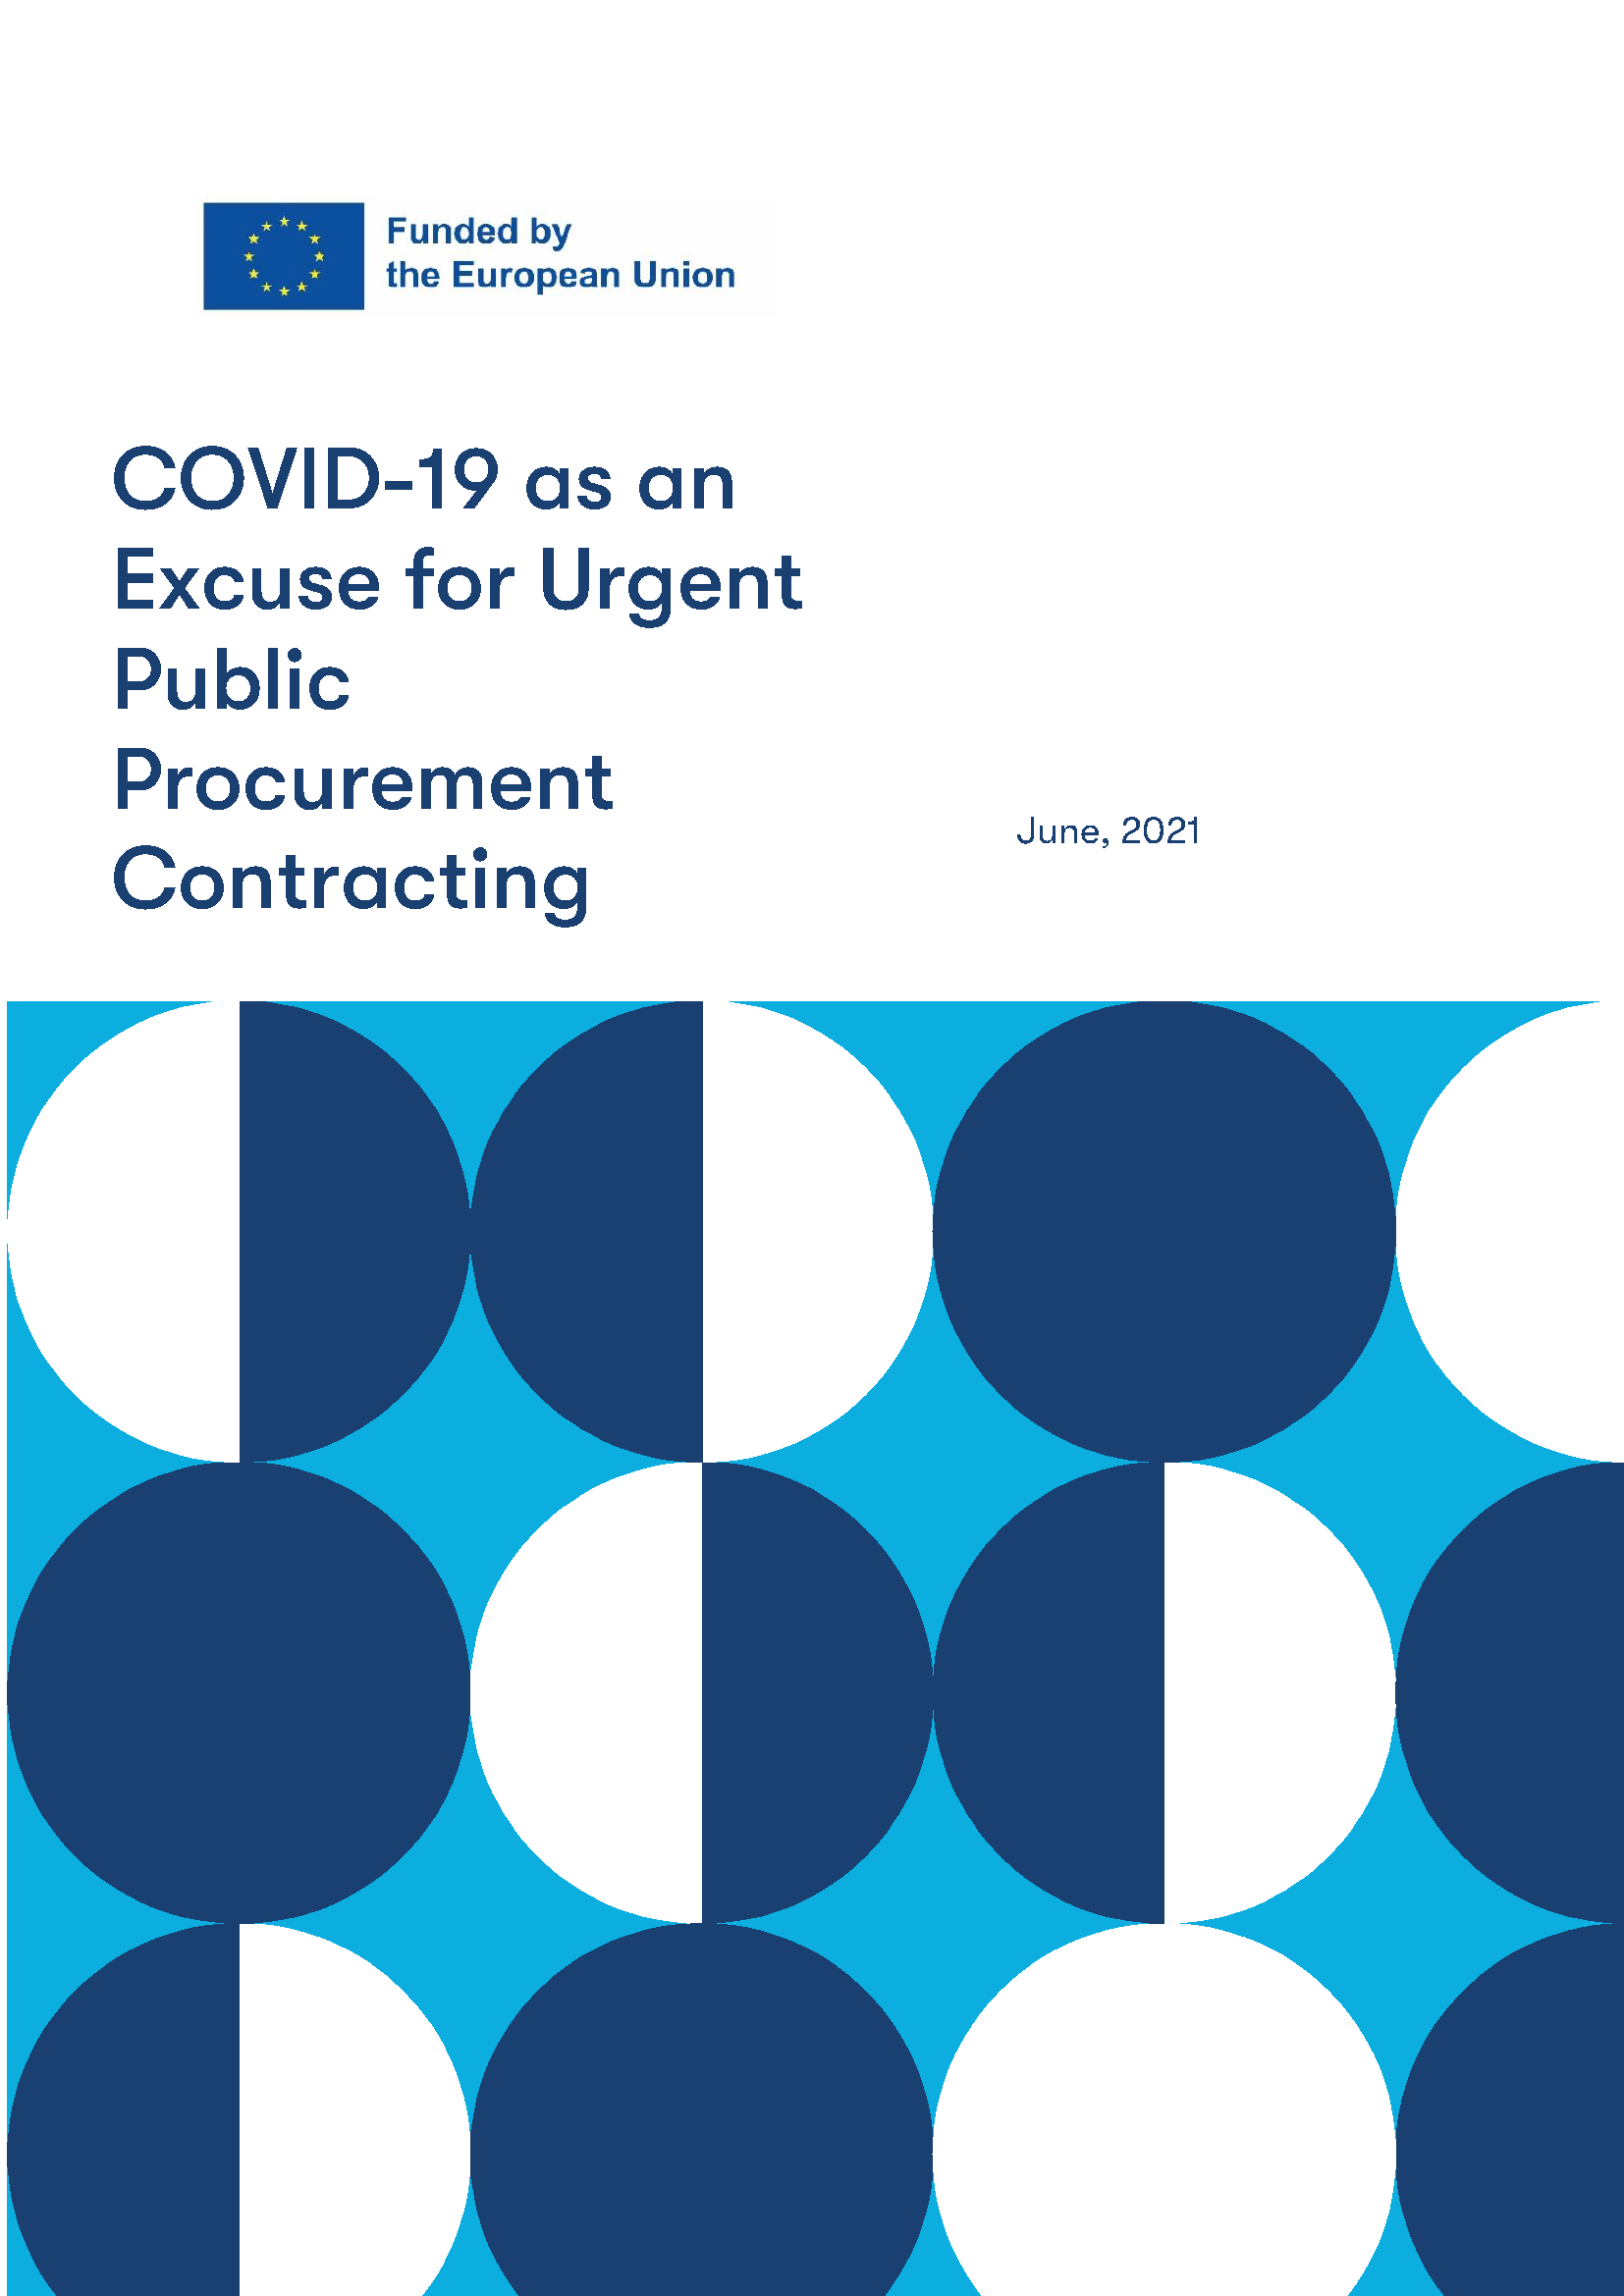 COVID-19 as an Excuse for Urgent Public Procurement Contracting